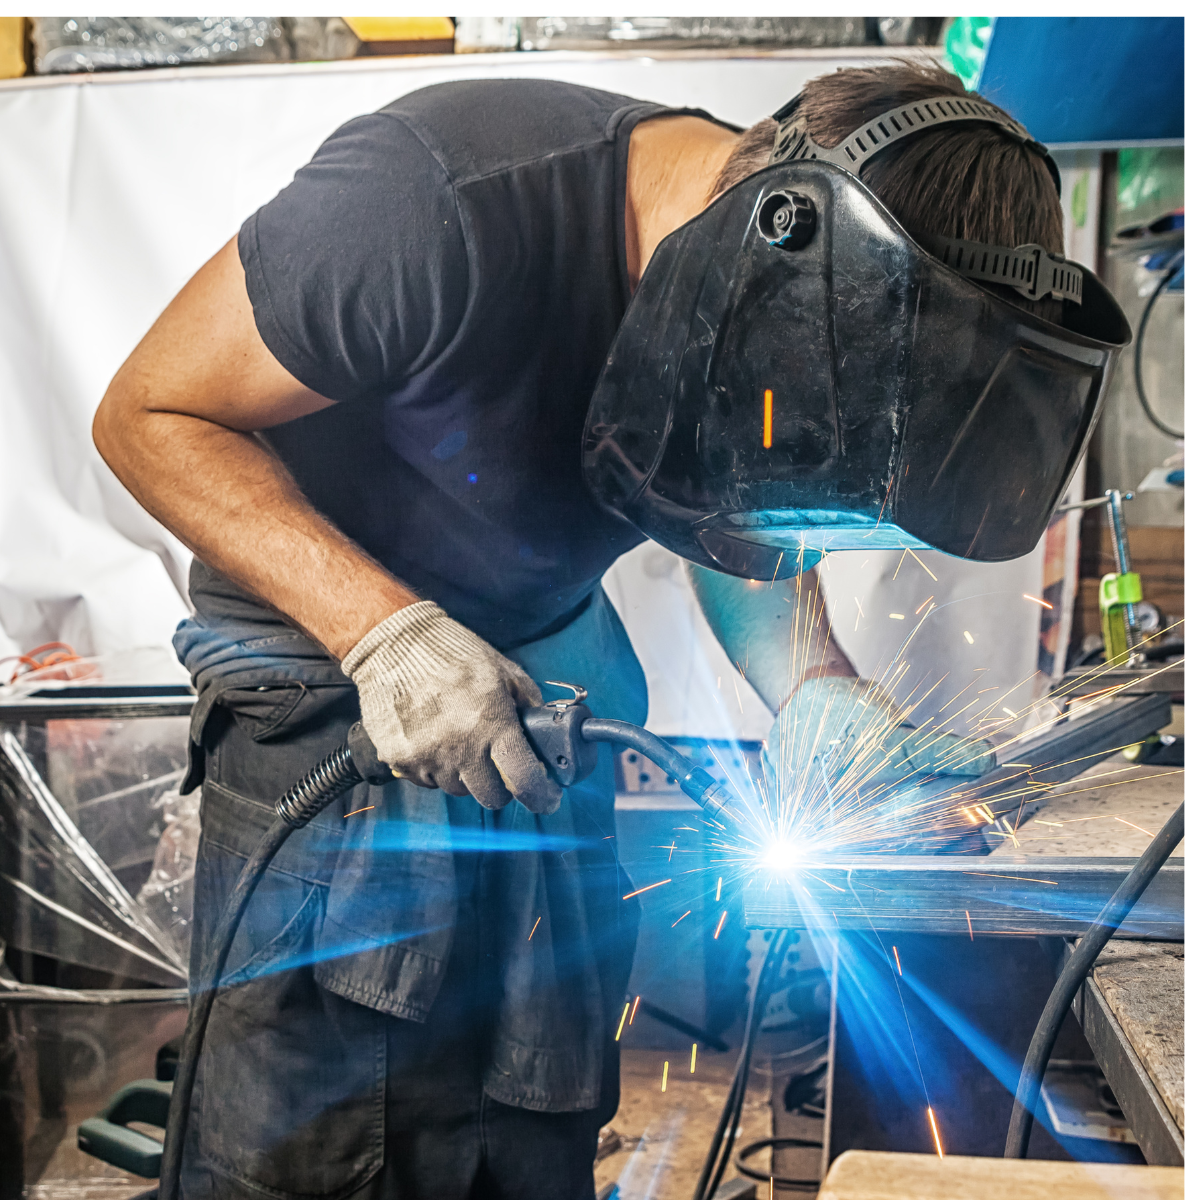 male welder using welding tool with sparks